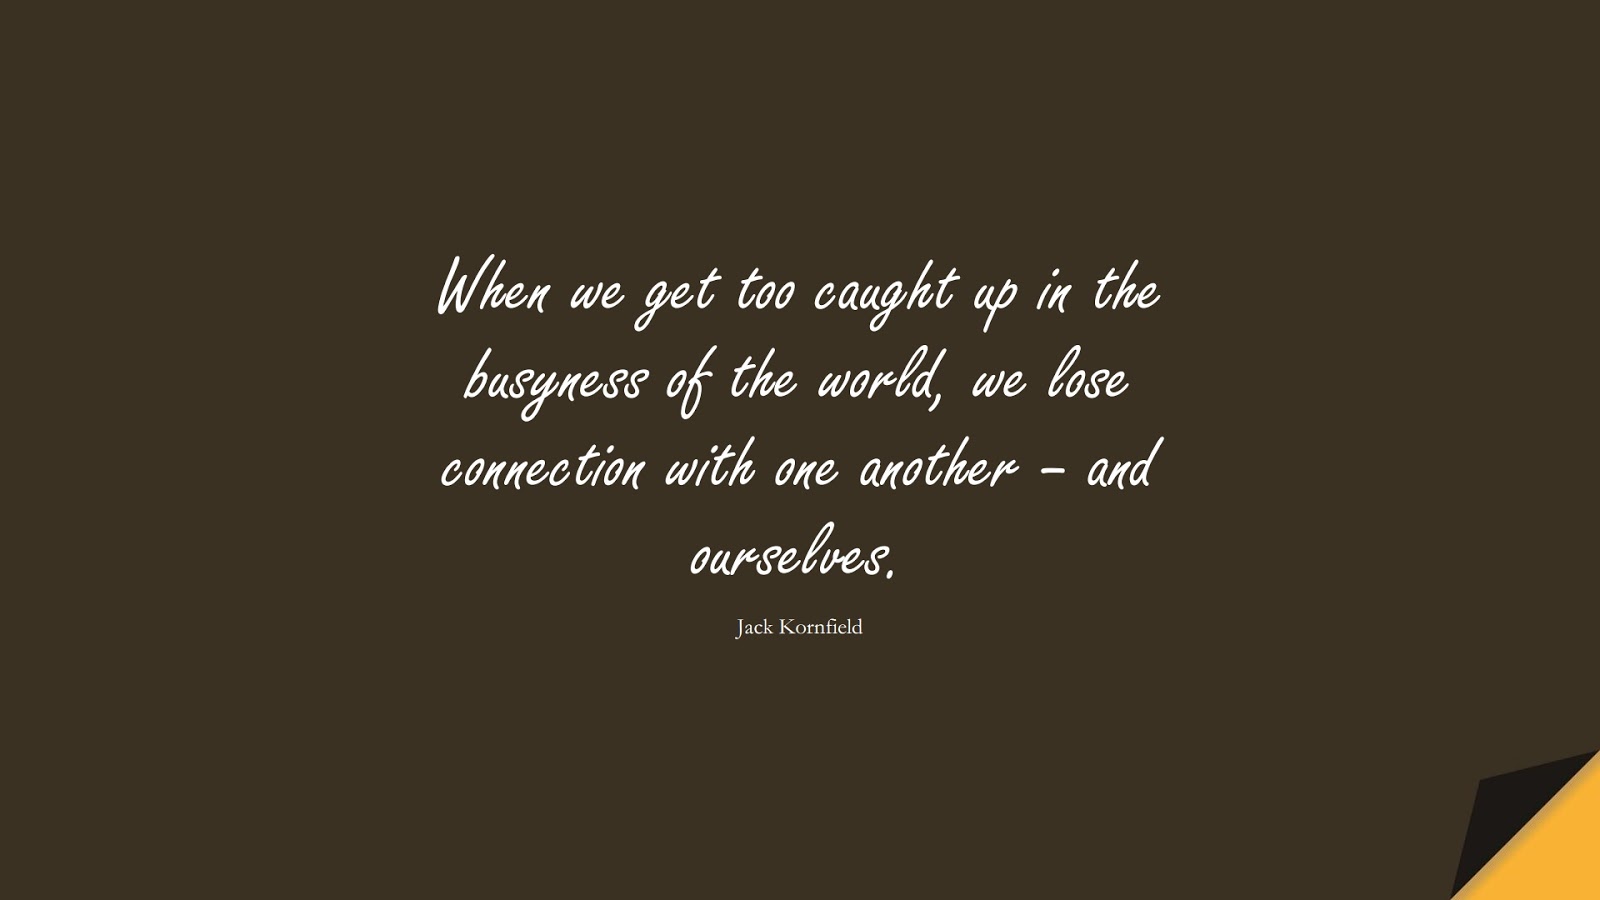 When we get too caught up in the busyness of the world, we lose connection with one another – and ourselves. (Jack Kornfield);  #StressQuotes